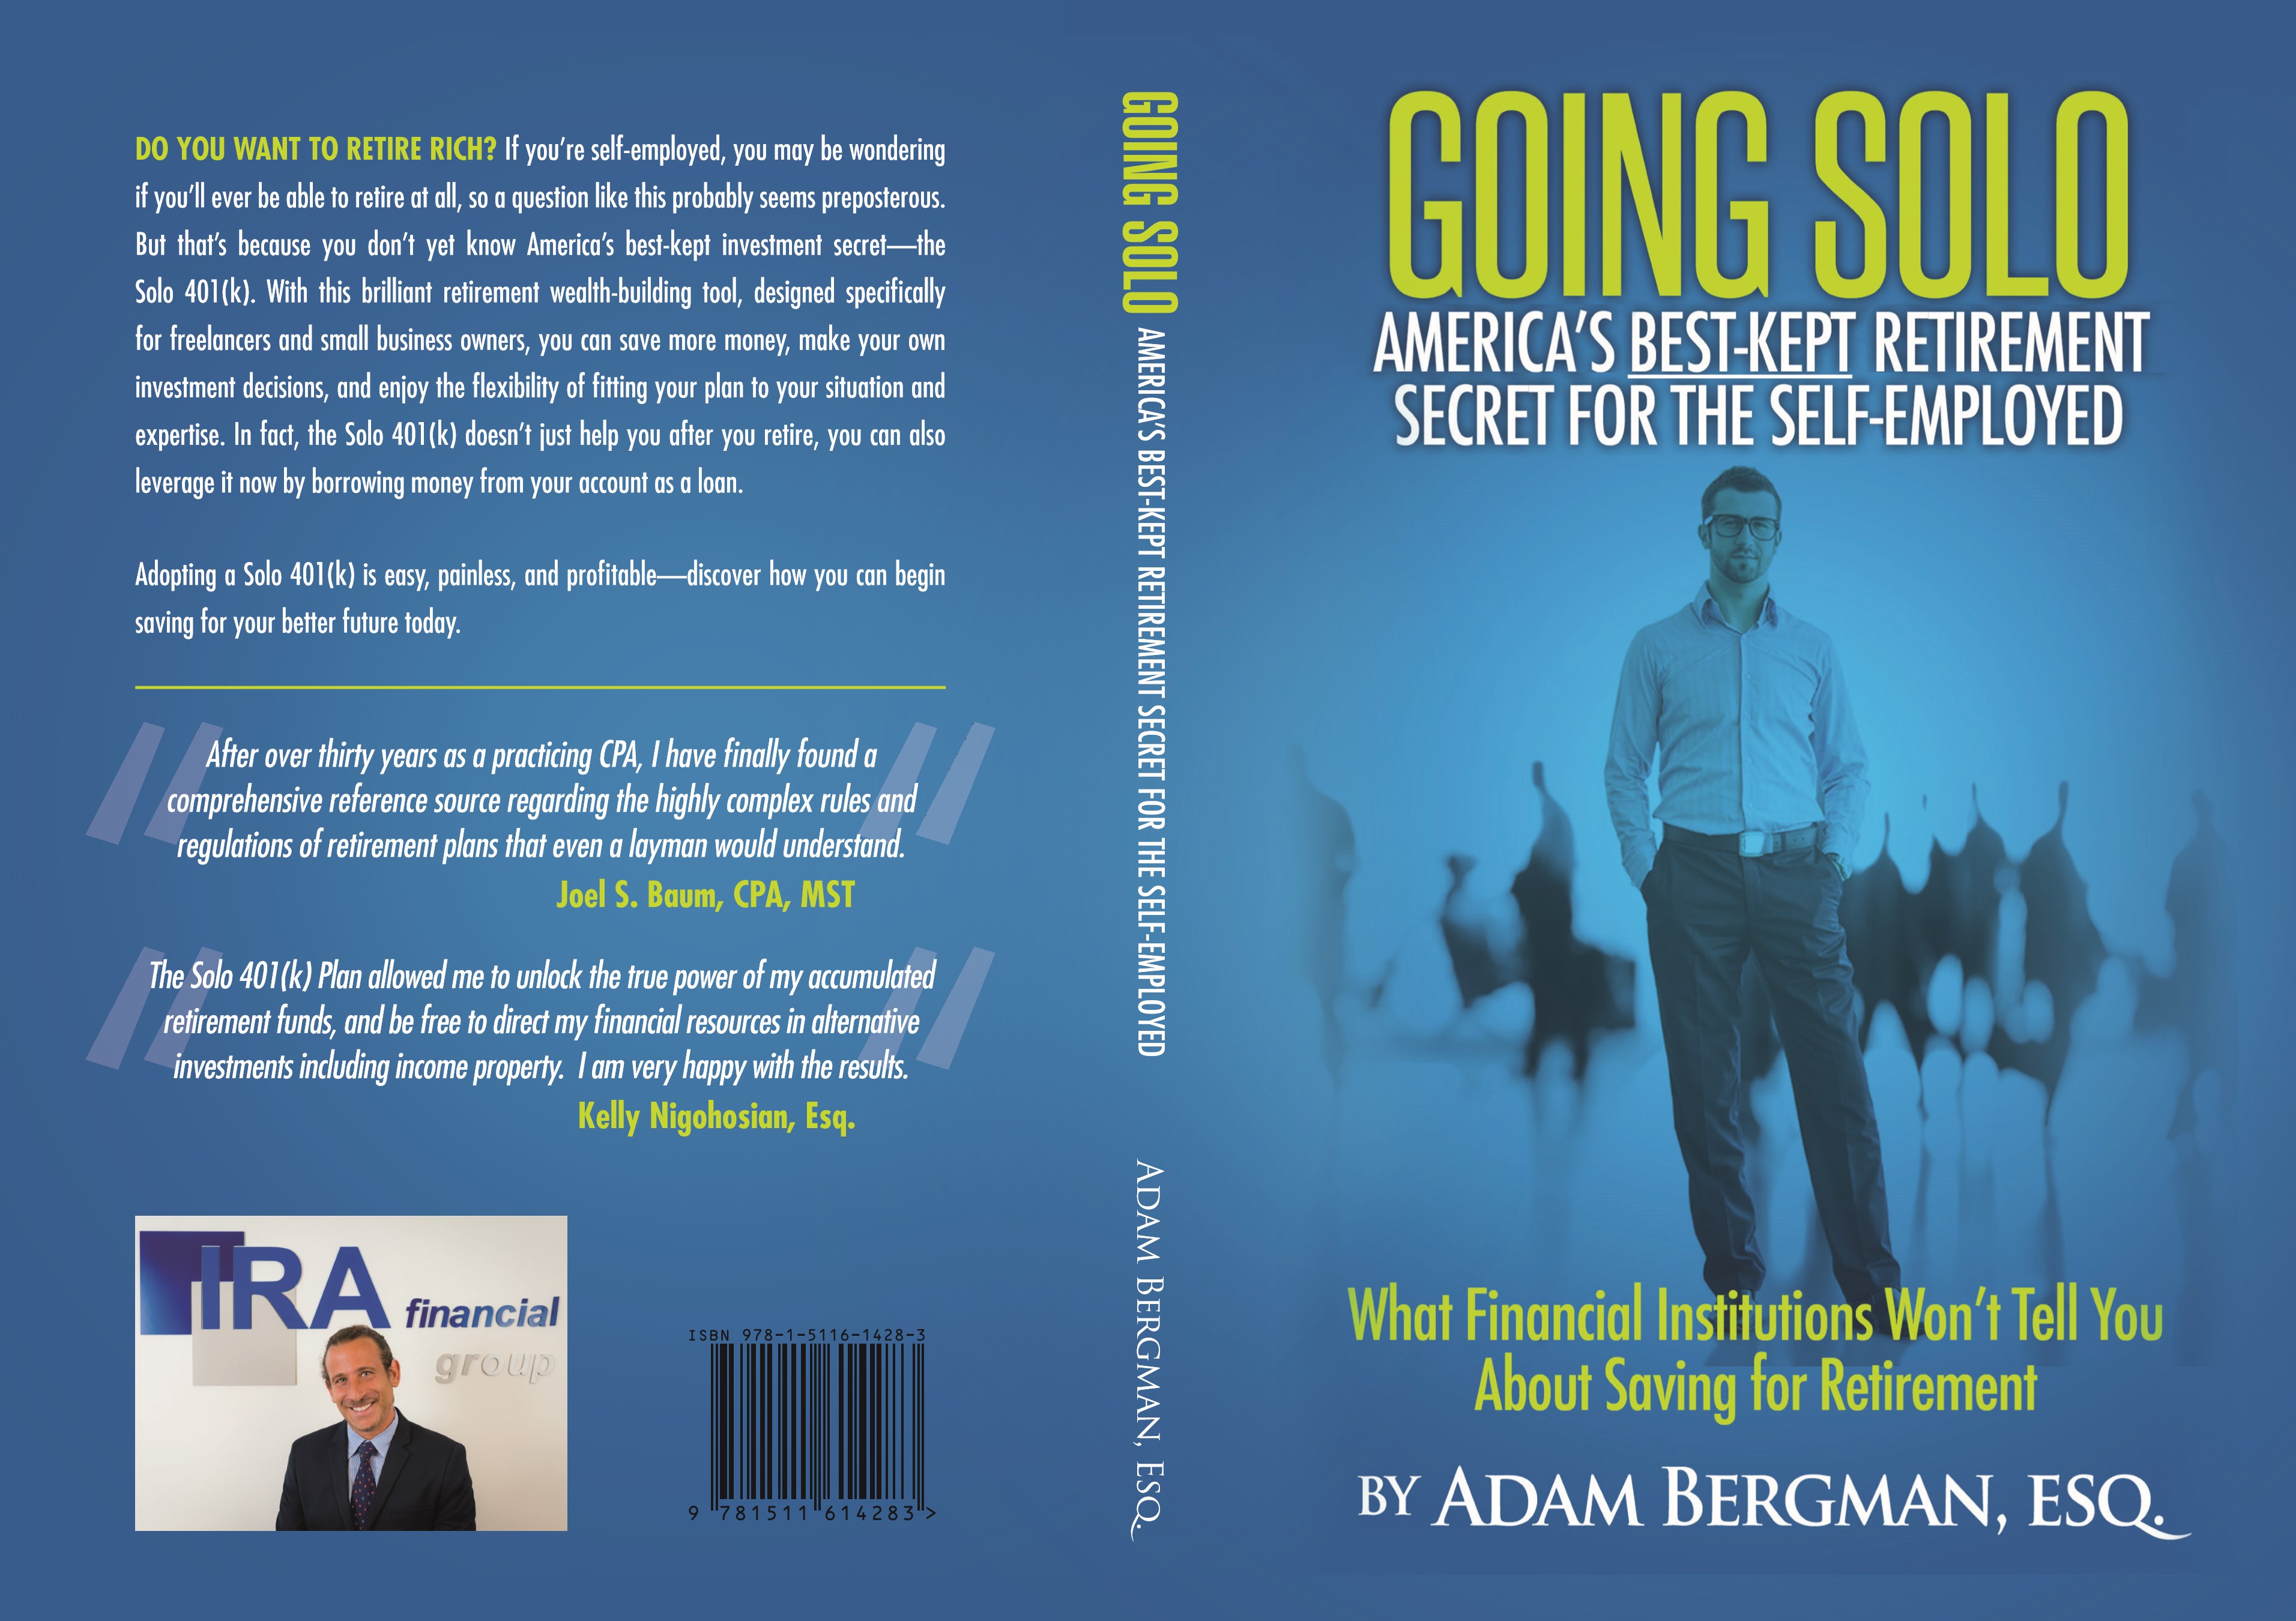 Adam Bergman, IRA Financial Group Partner, authors market’s first book discussing the self-directed Solo 401(k) Plan